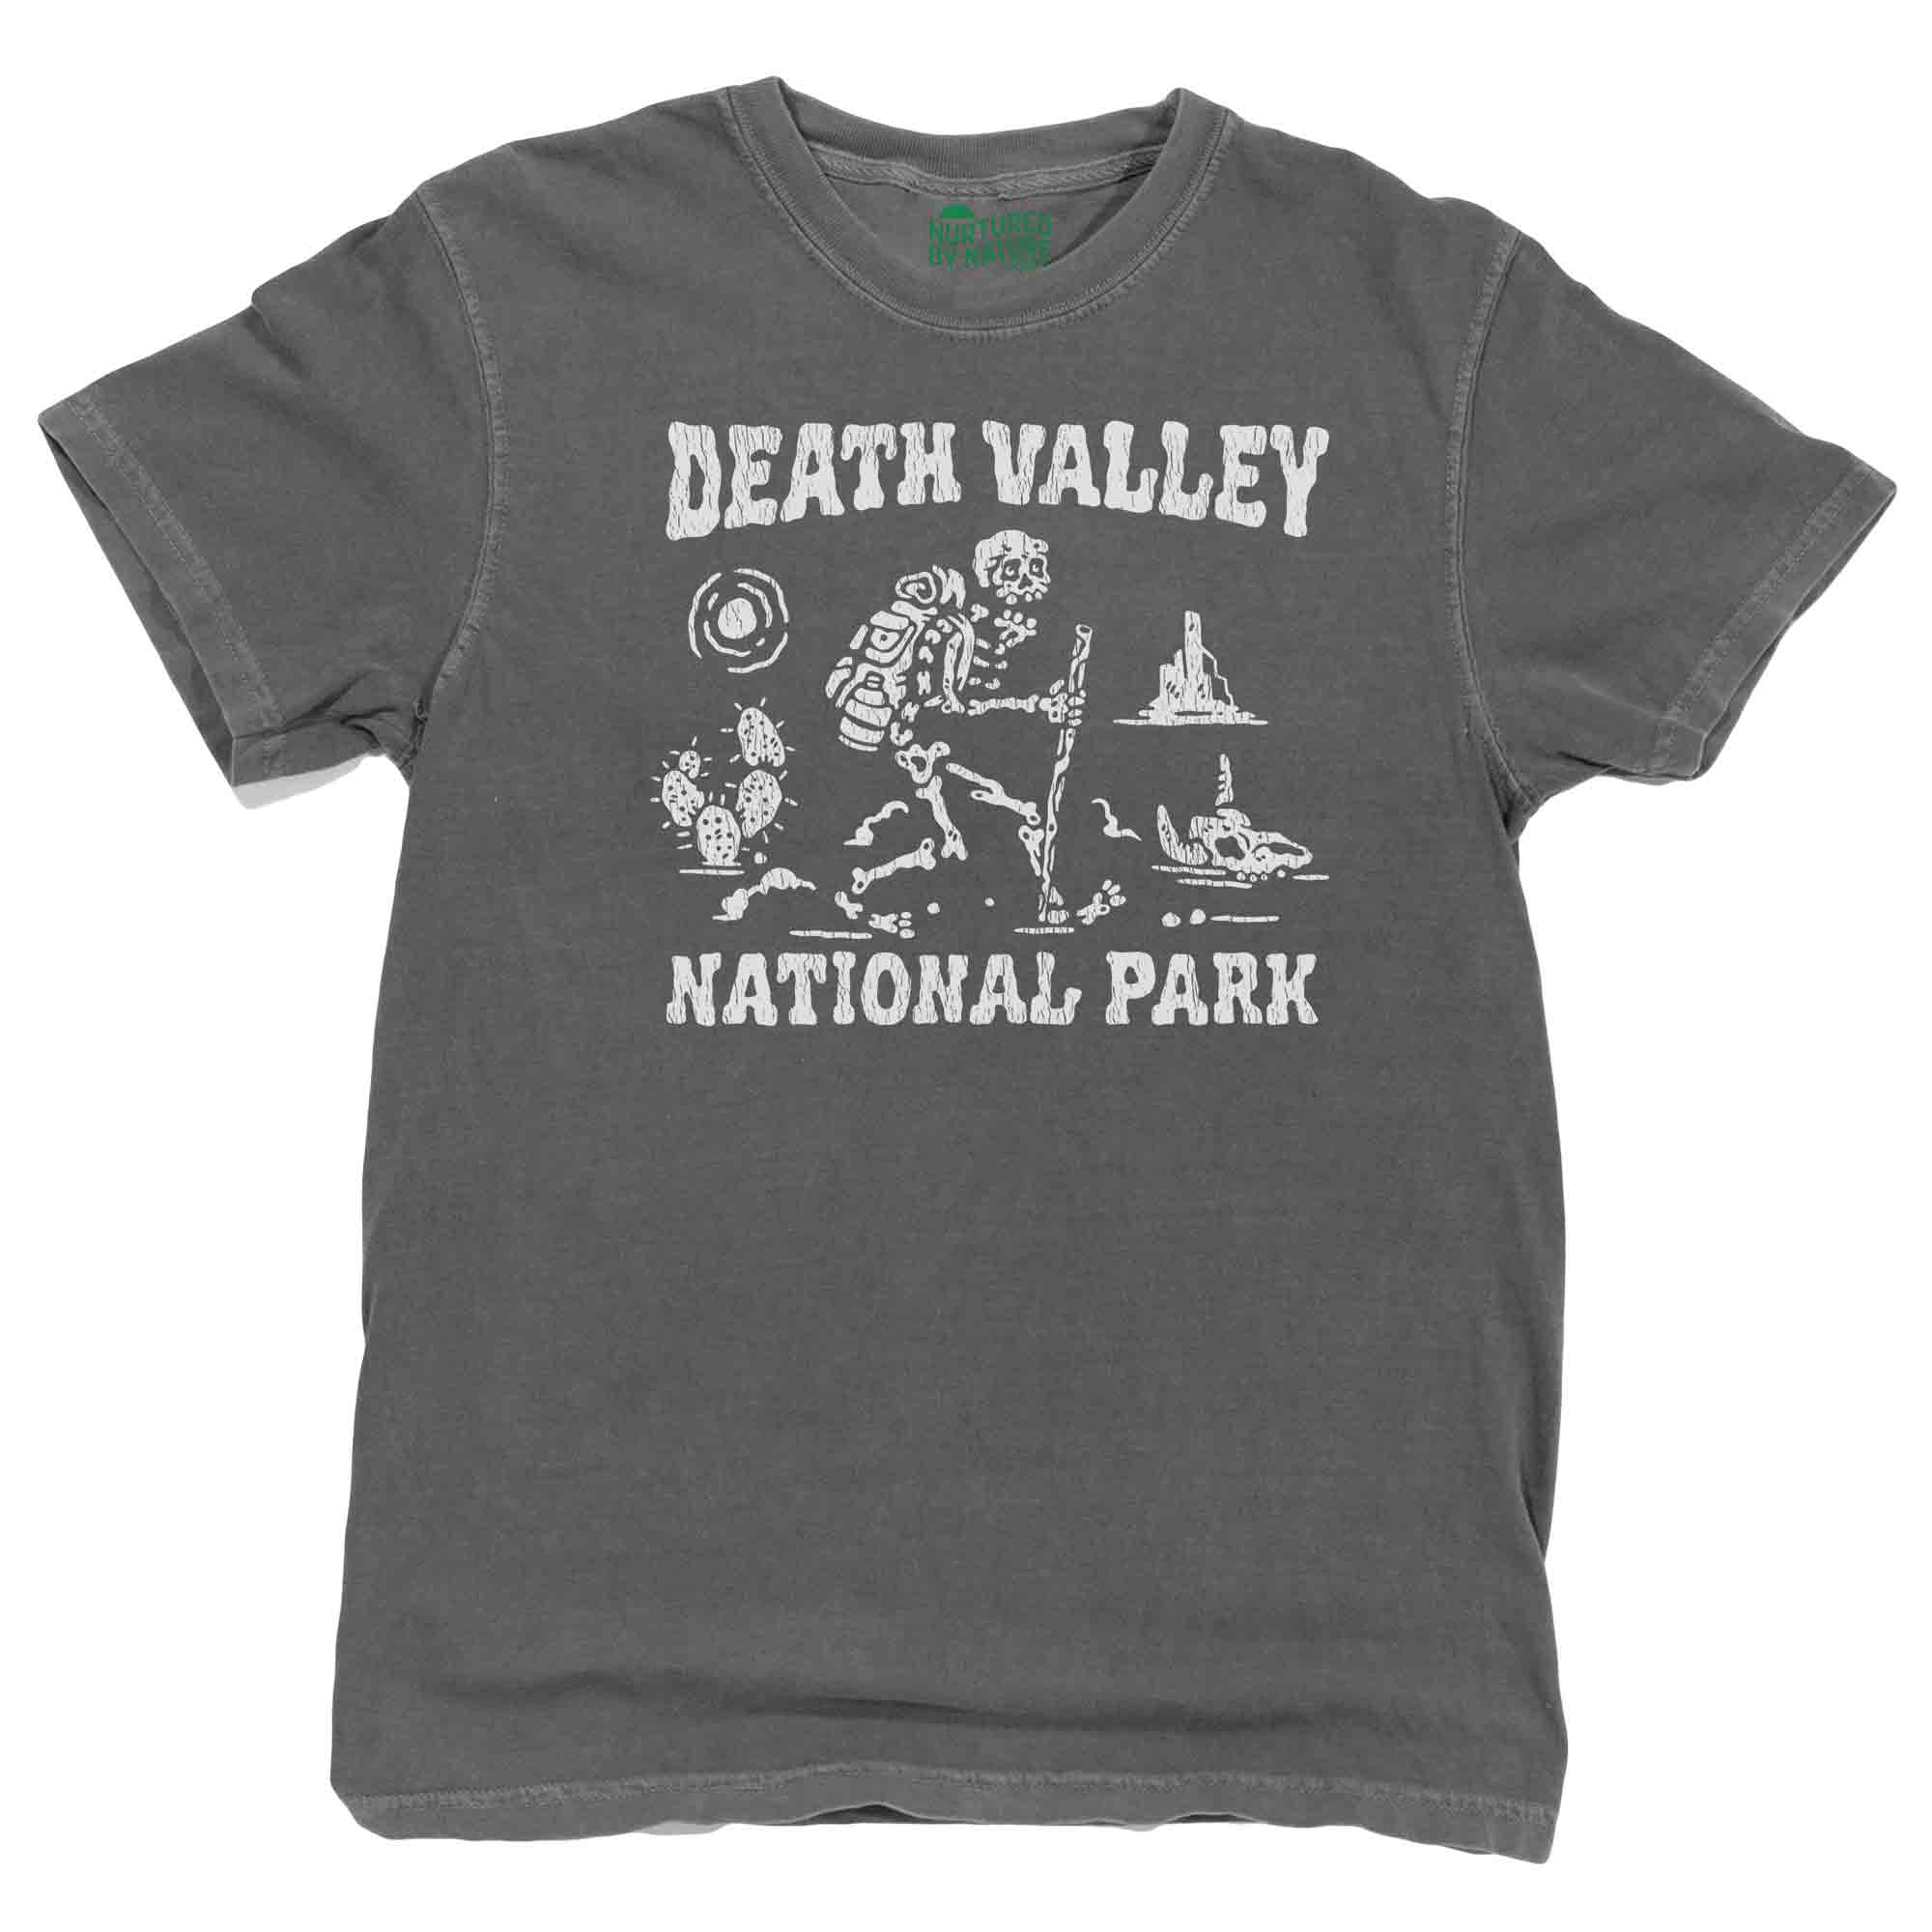 Death Valley National Park with Hiking Skeleton Graphic T-Shirt by Nurtured by Nature Studio